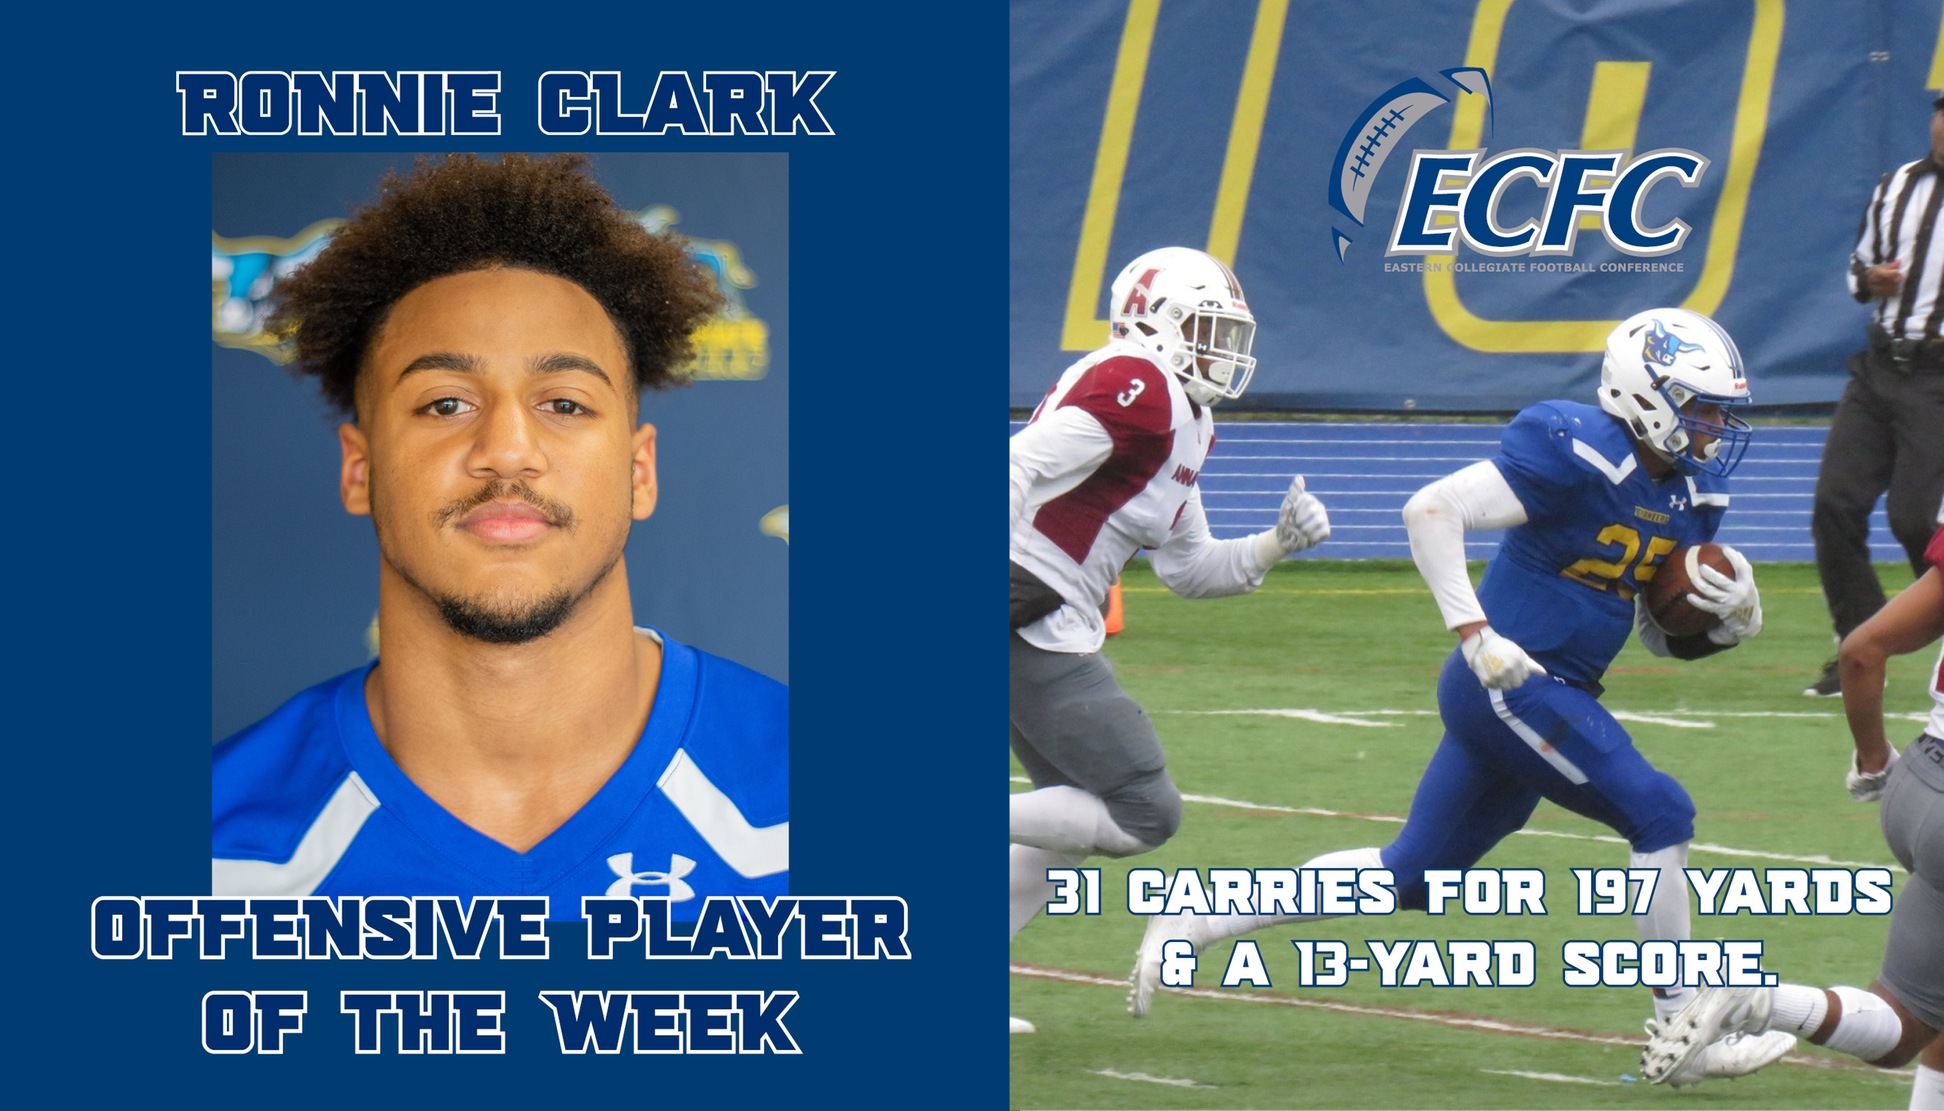 Ronnie Clark was named ECFC Offensive Player of the Week